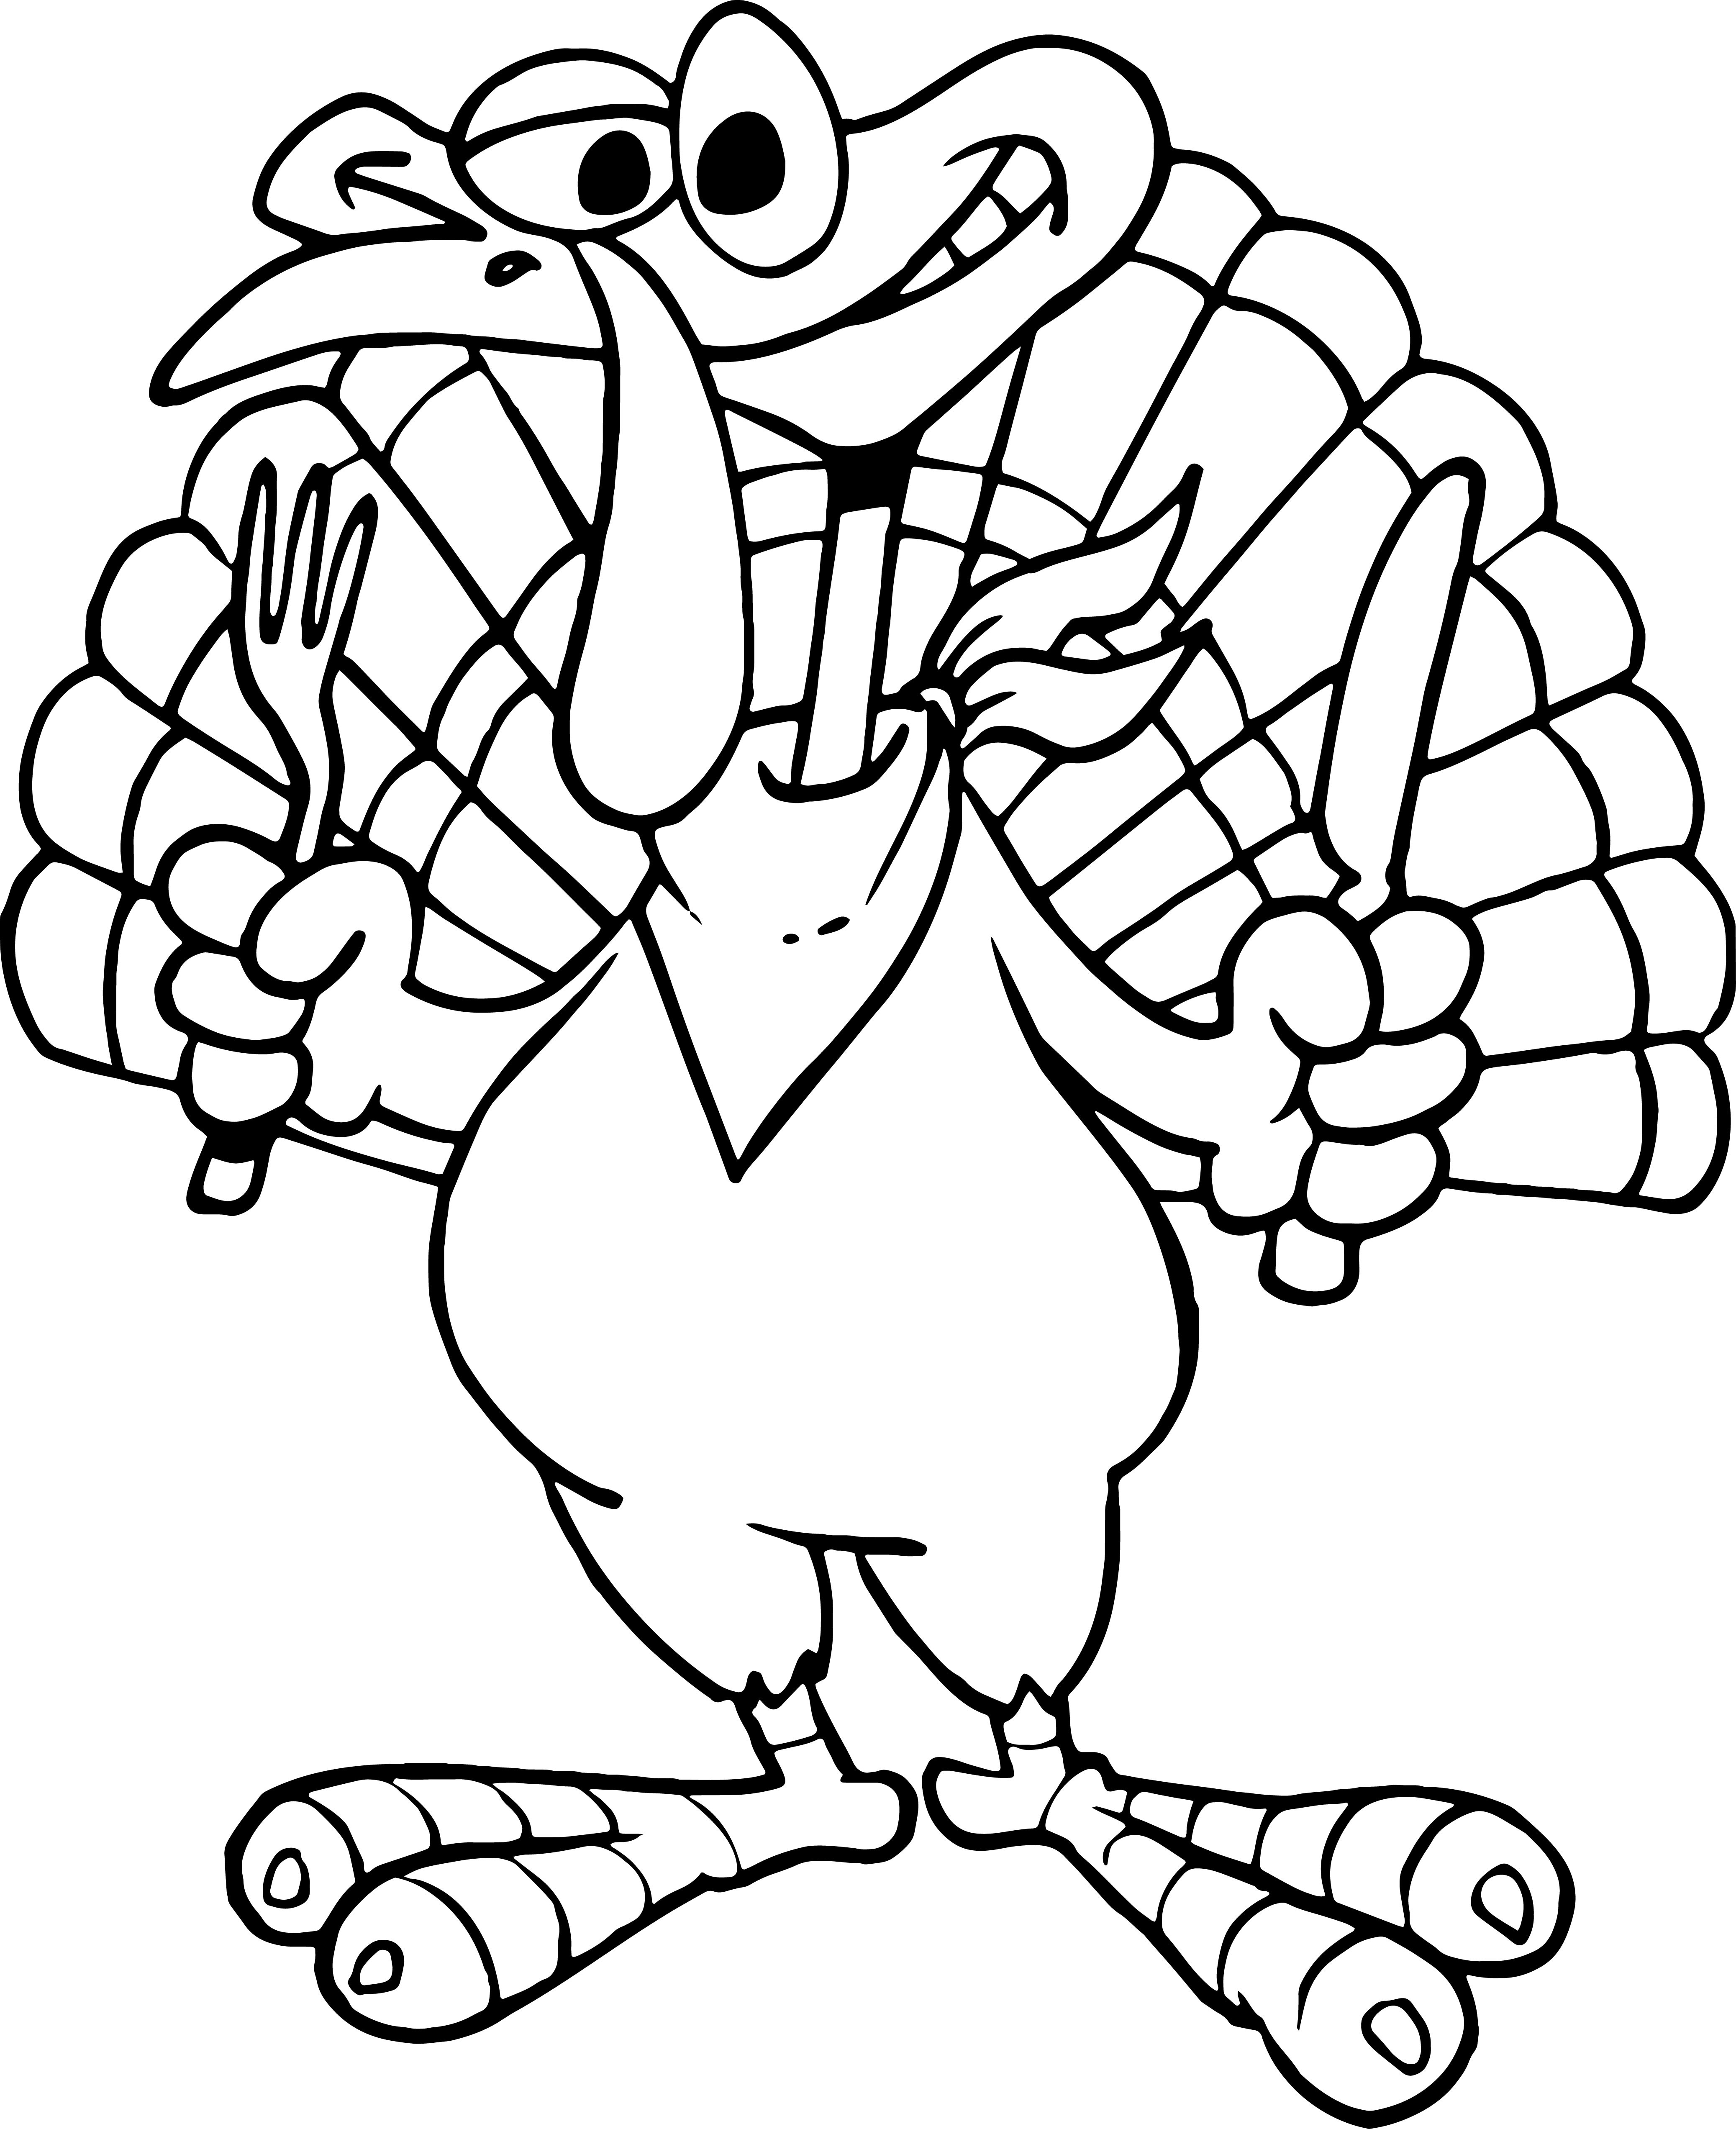 Coloring Book Pages Of Turkeys
 Turkey Cartoon Coloring Pages